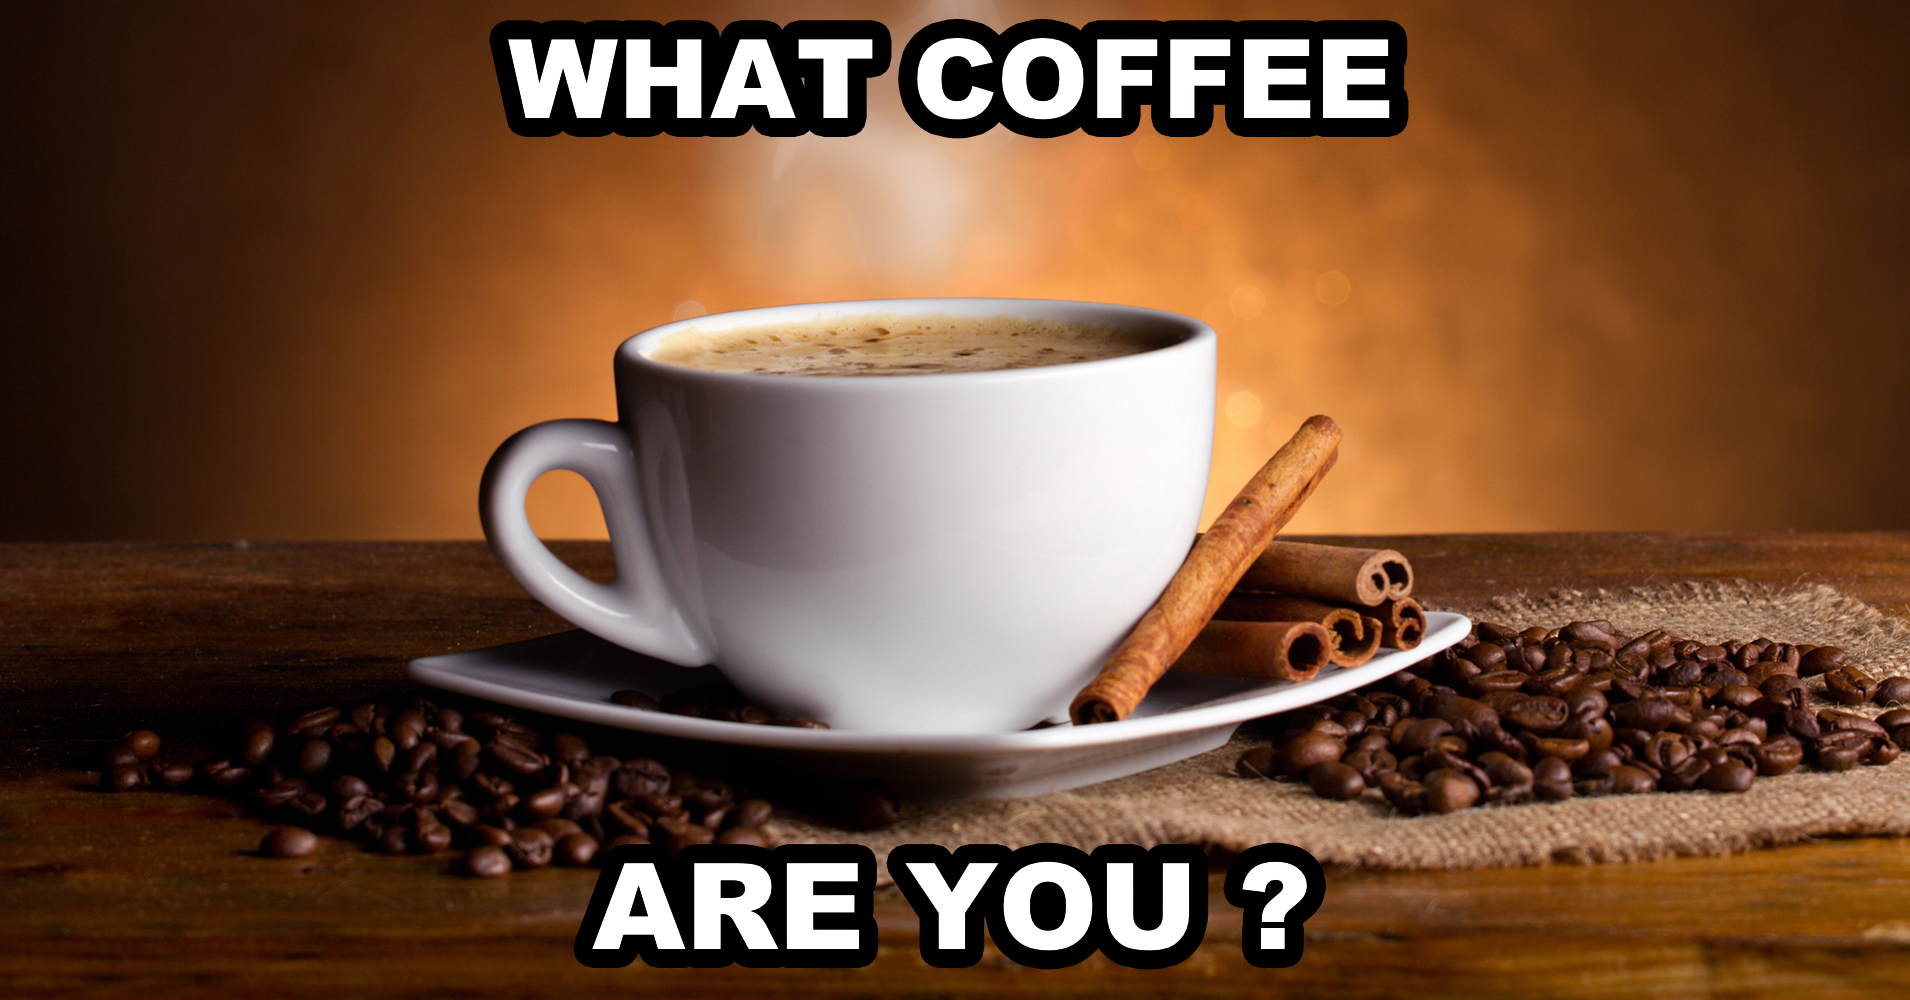 What Kind Of Coffee Are You? - Quiz - Quizony.com